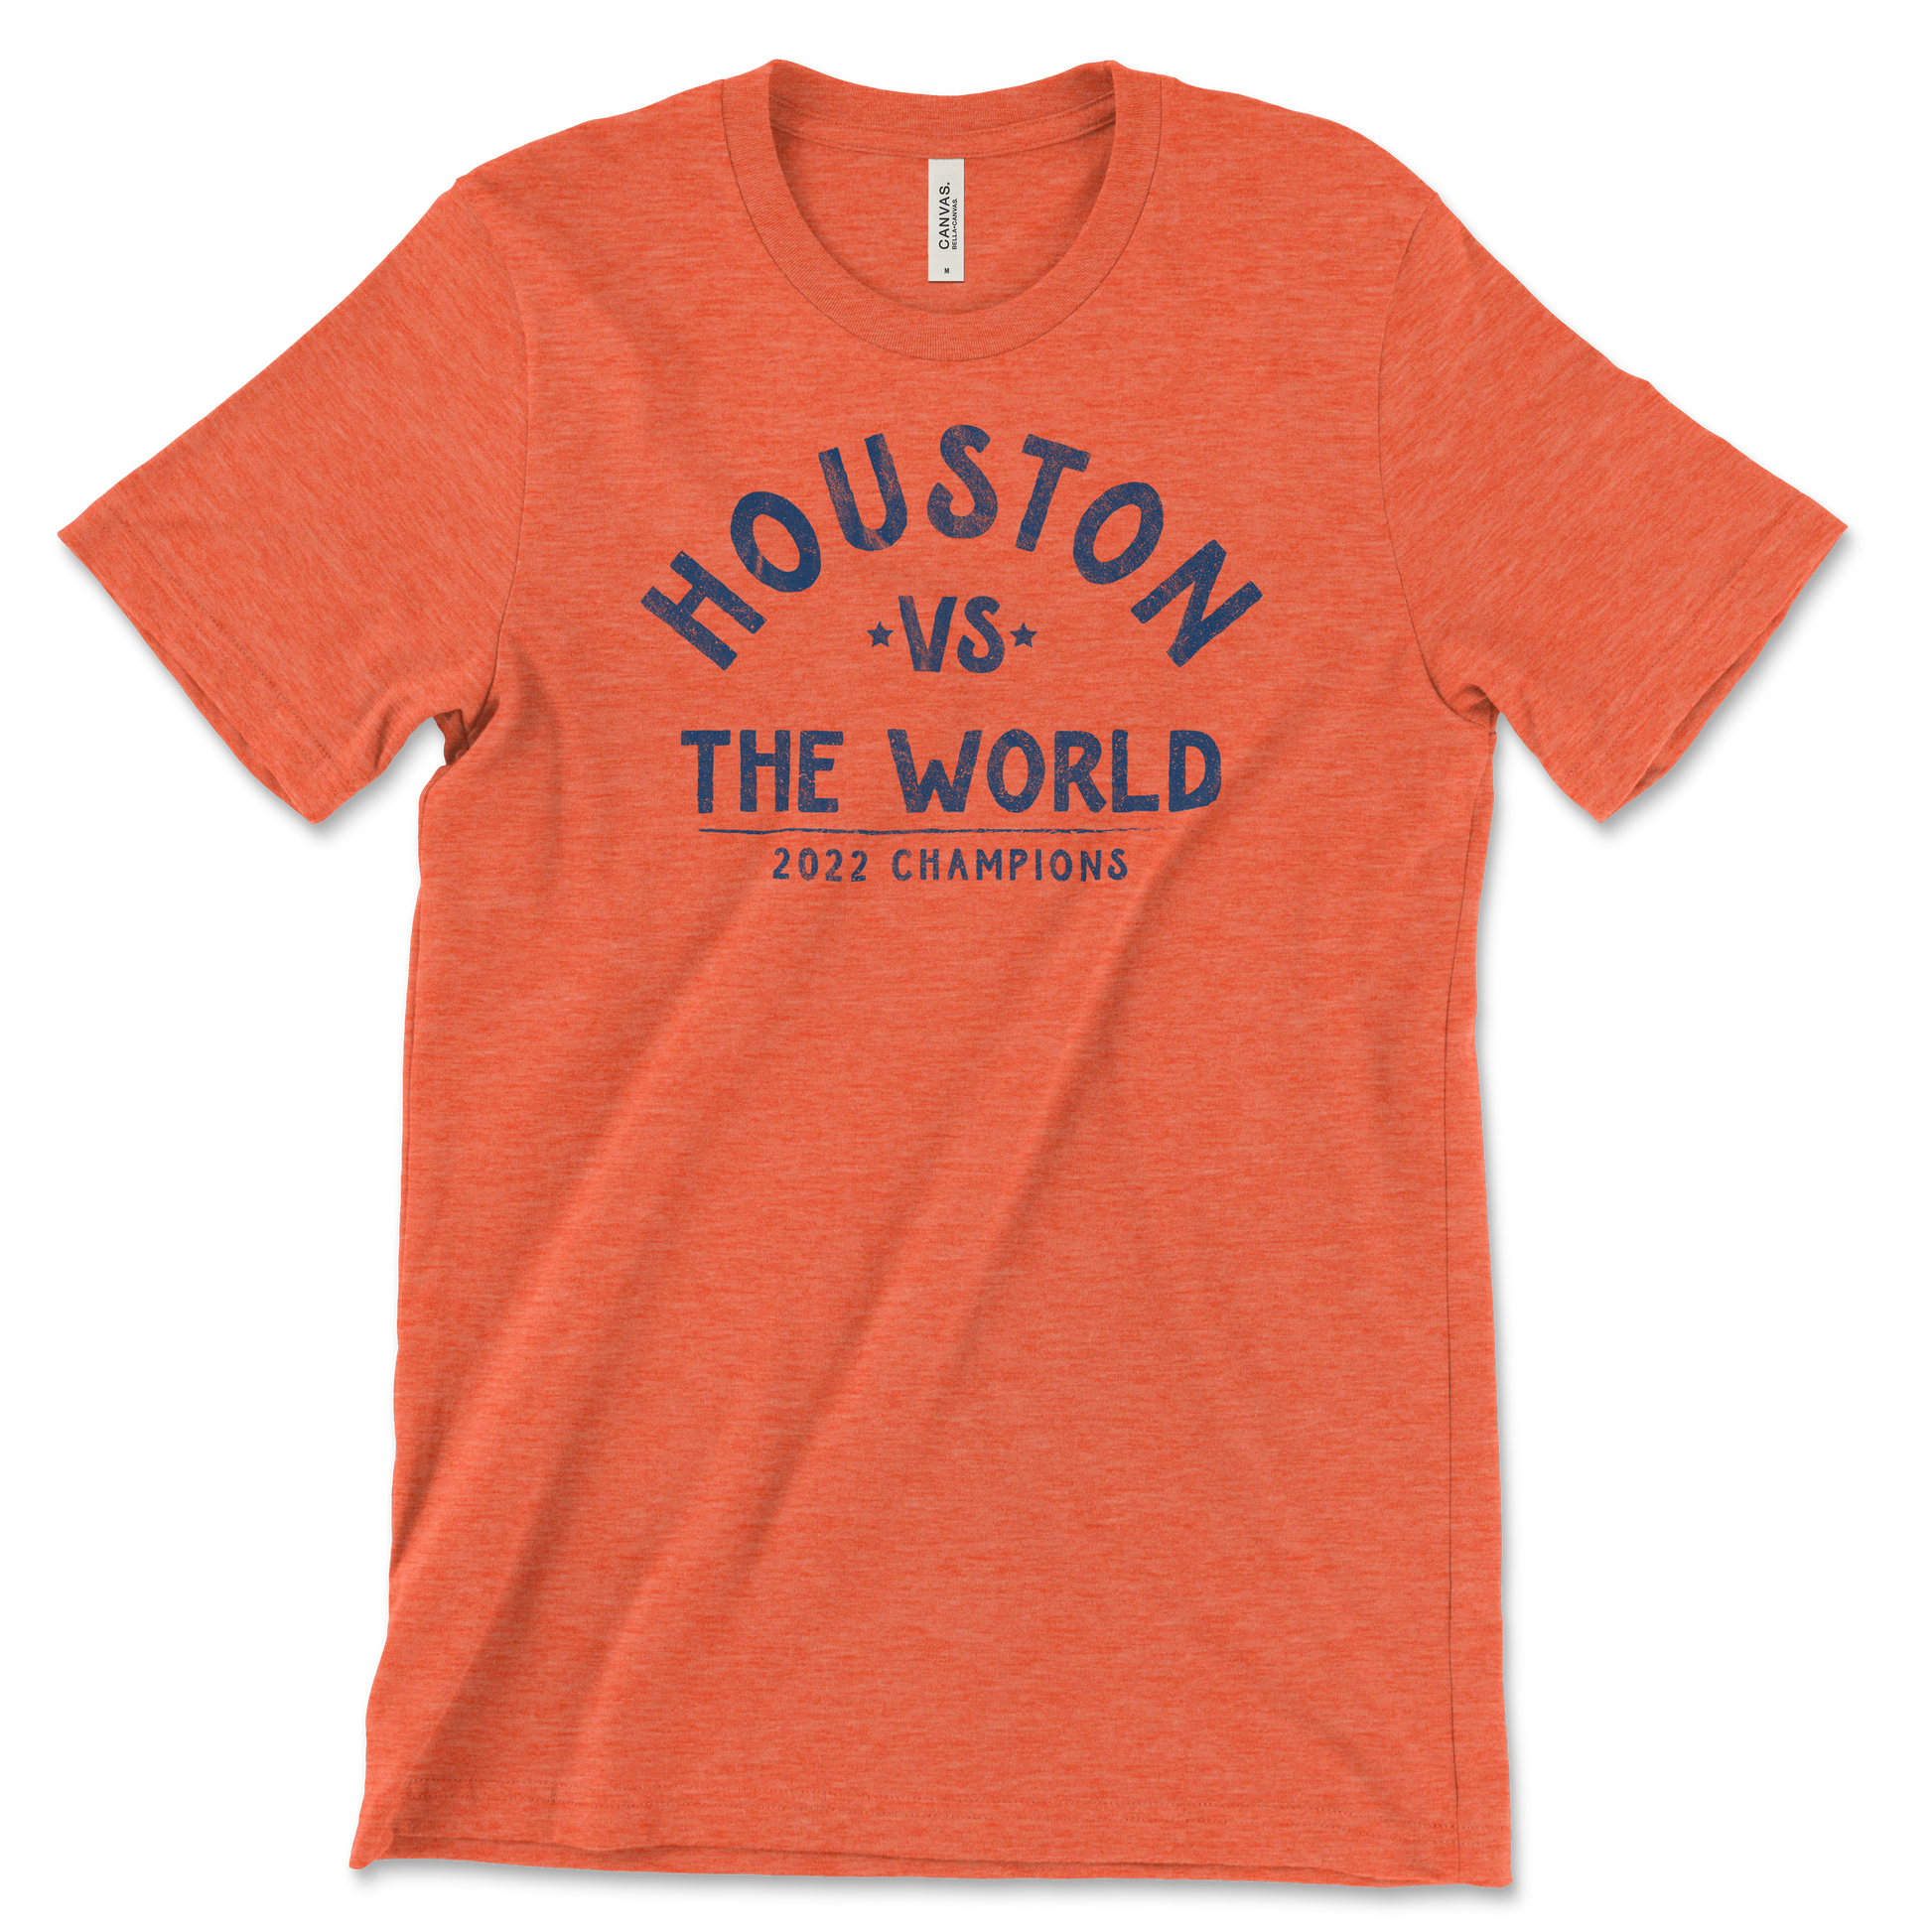 Where can I buy World Series gear in Houston?